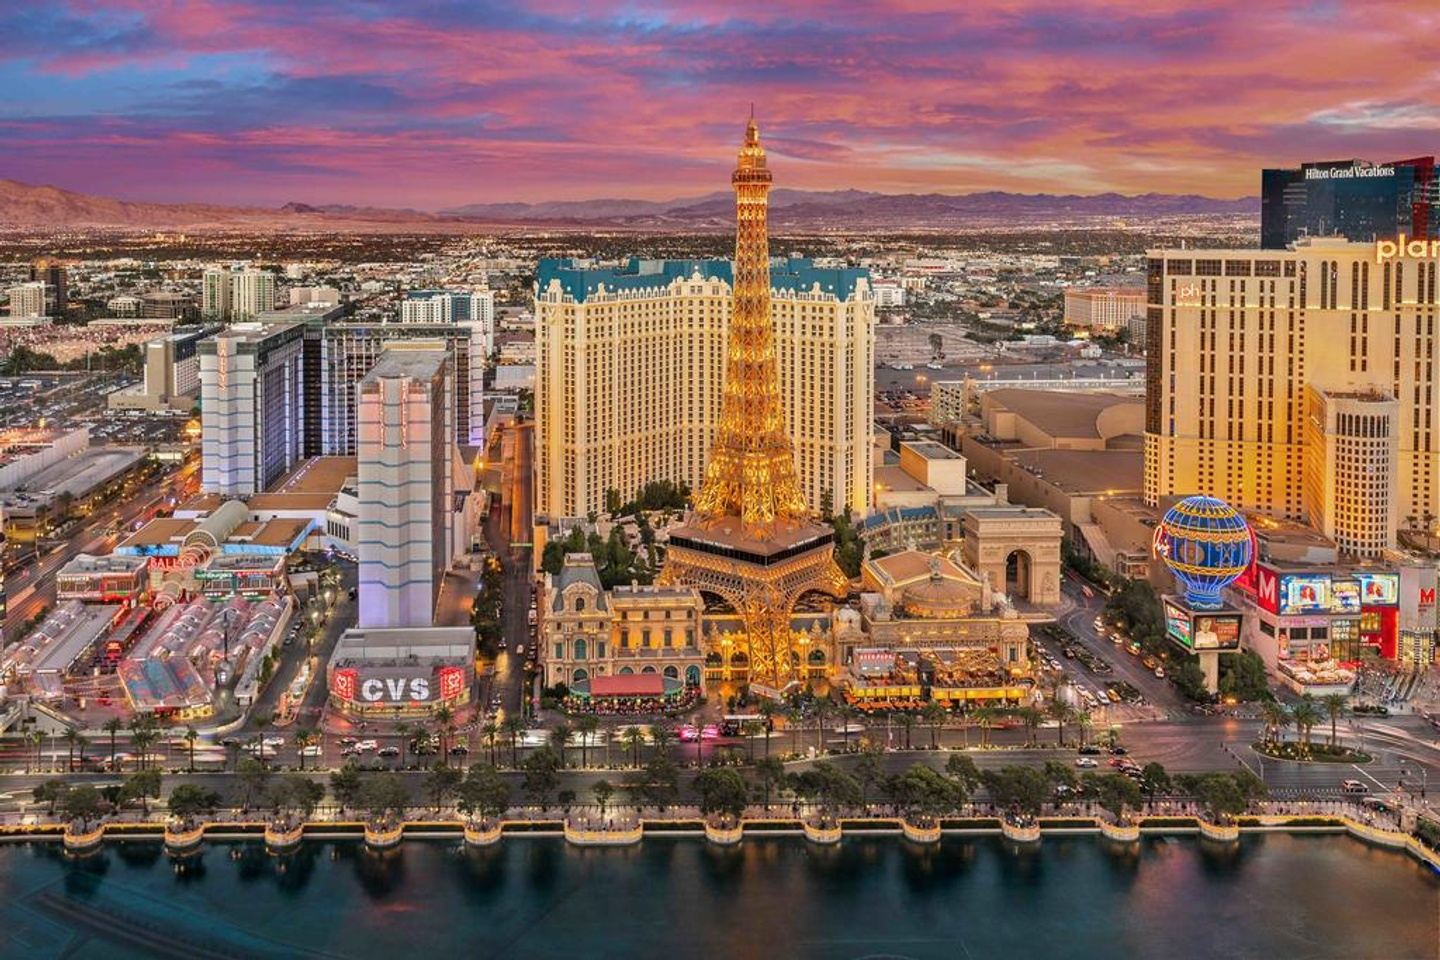 Tips for Booking Hotel in Las Vegas